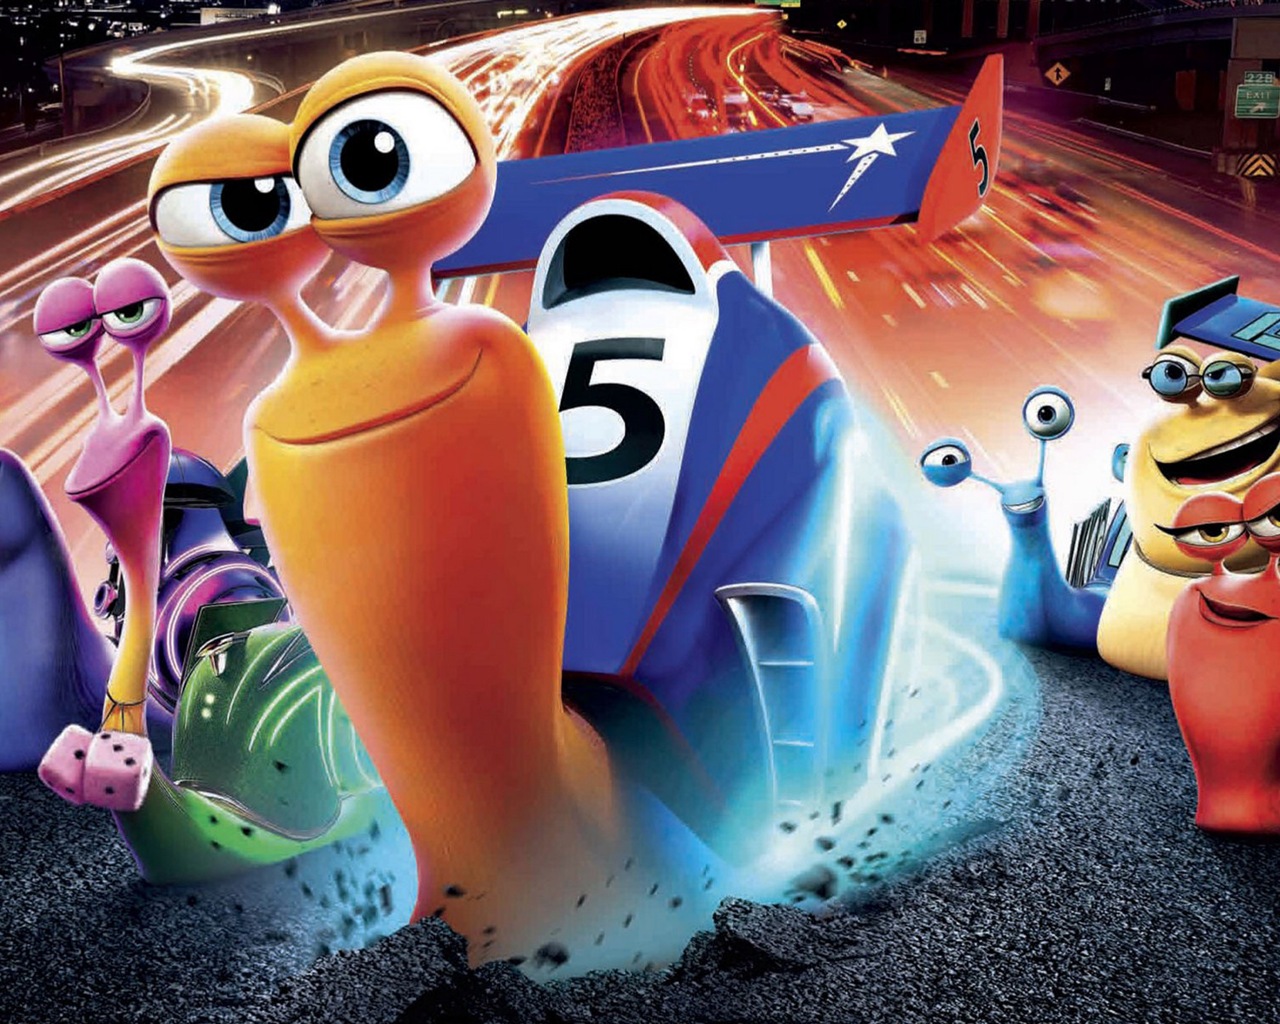 Turbo 3D movie HD wallpapers #2 - 1280x1024